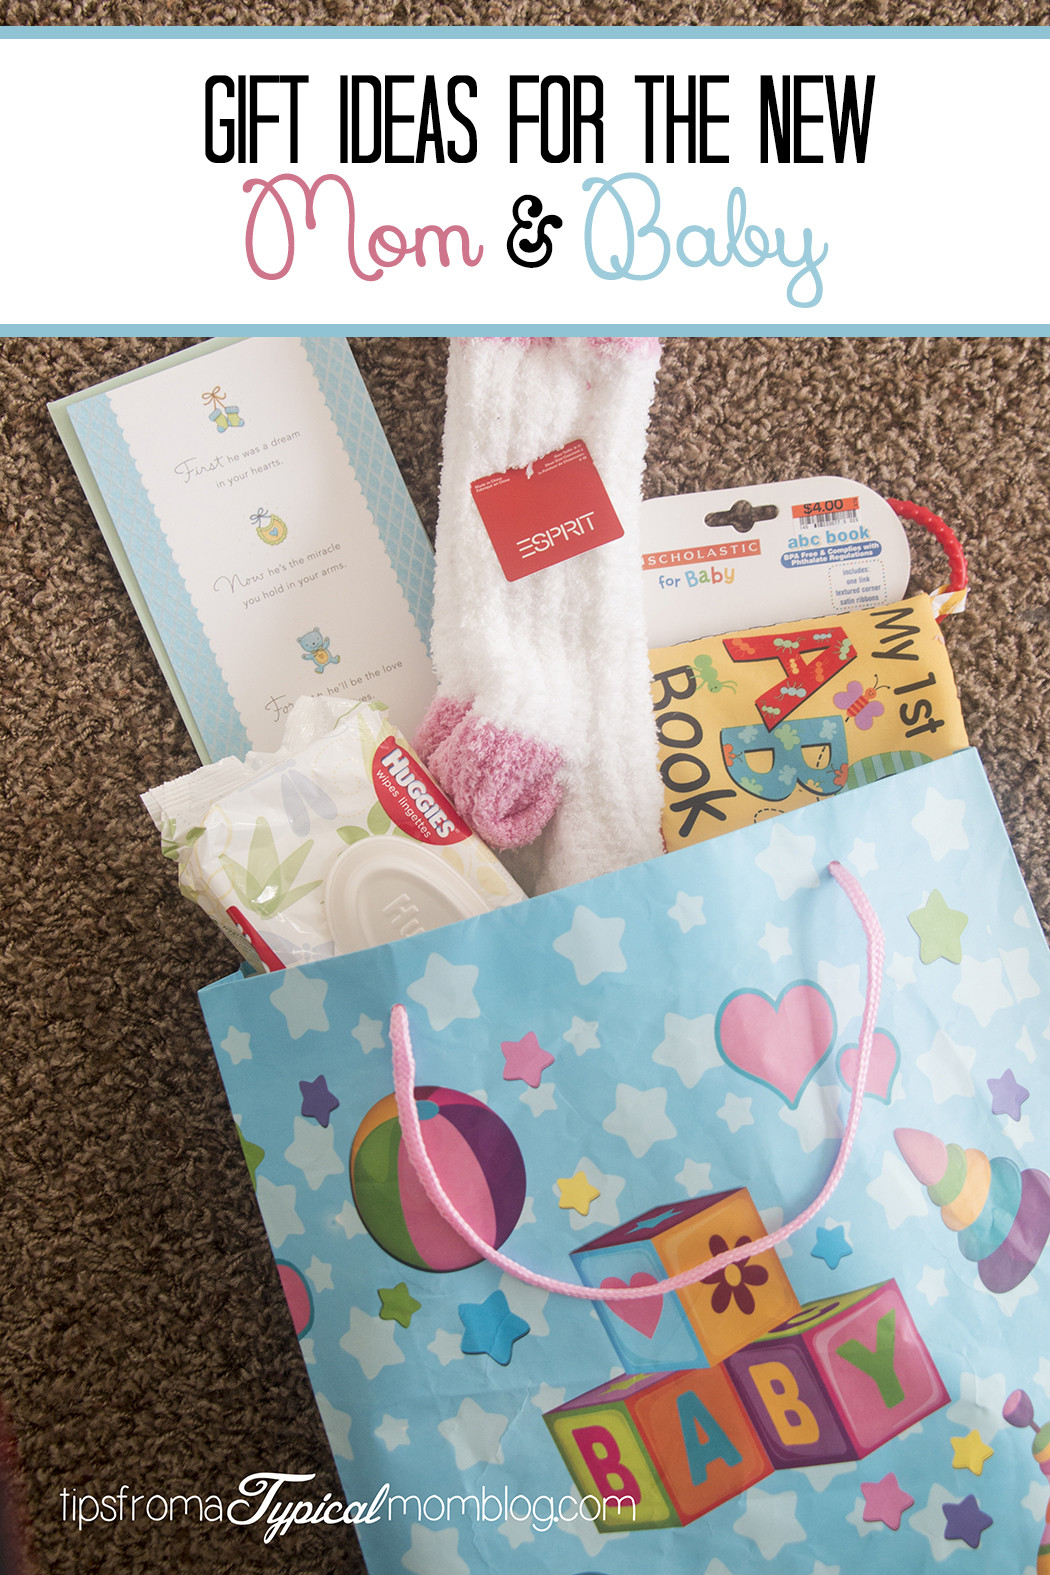 Baby Picture Gift Ideas
 Gift Ideas for the New Mom and Baby Tips from a Typical Mom